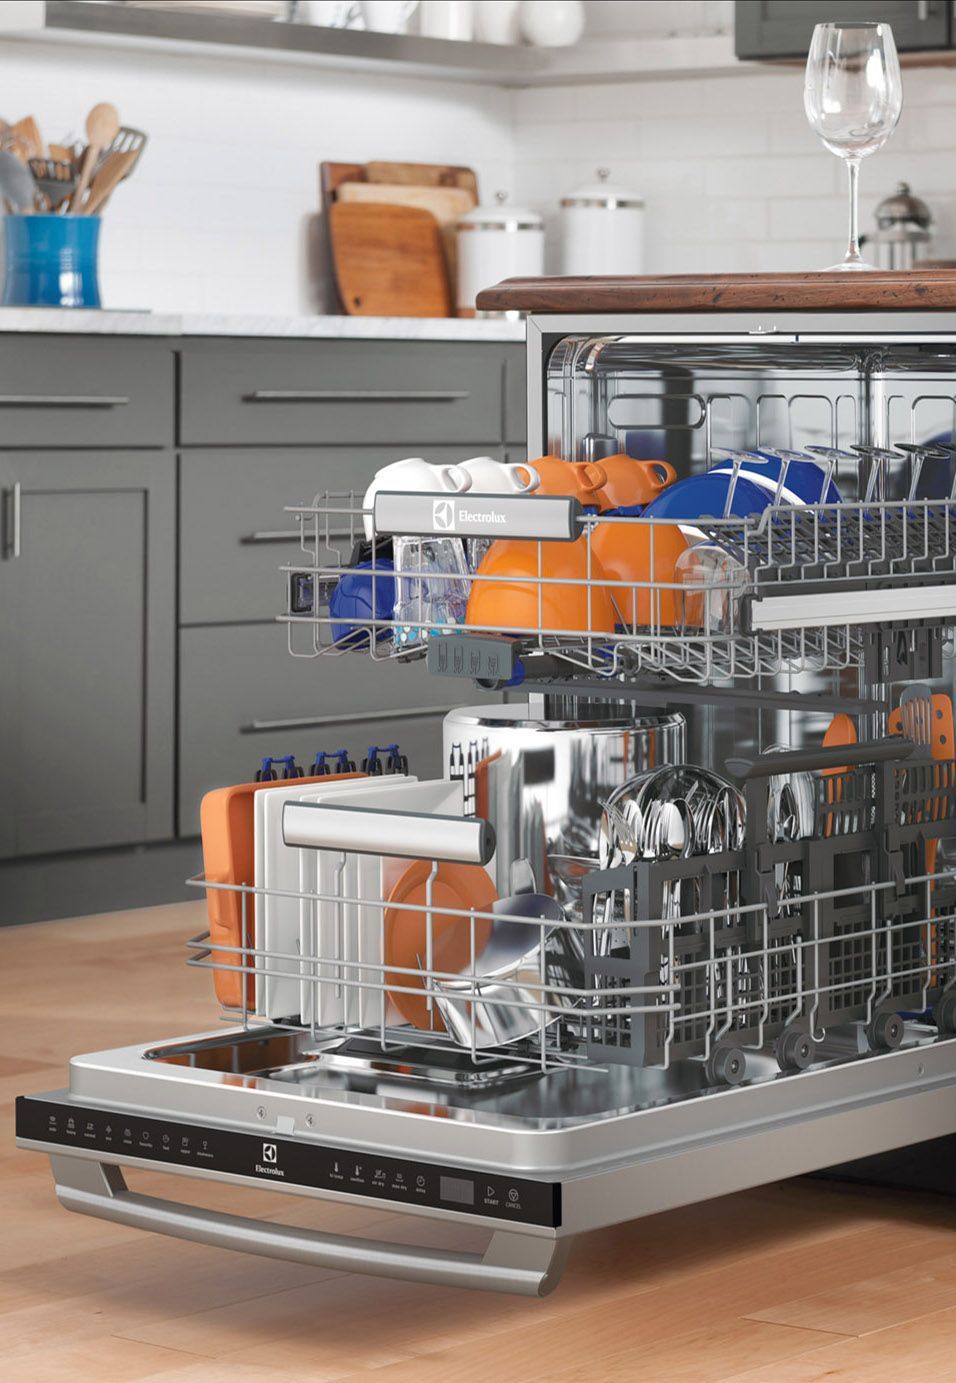 Every plate has its place. From wineglasses to stockpots, Electrolux dishwashers